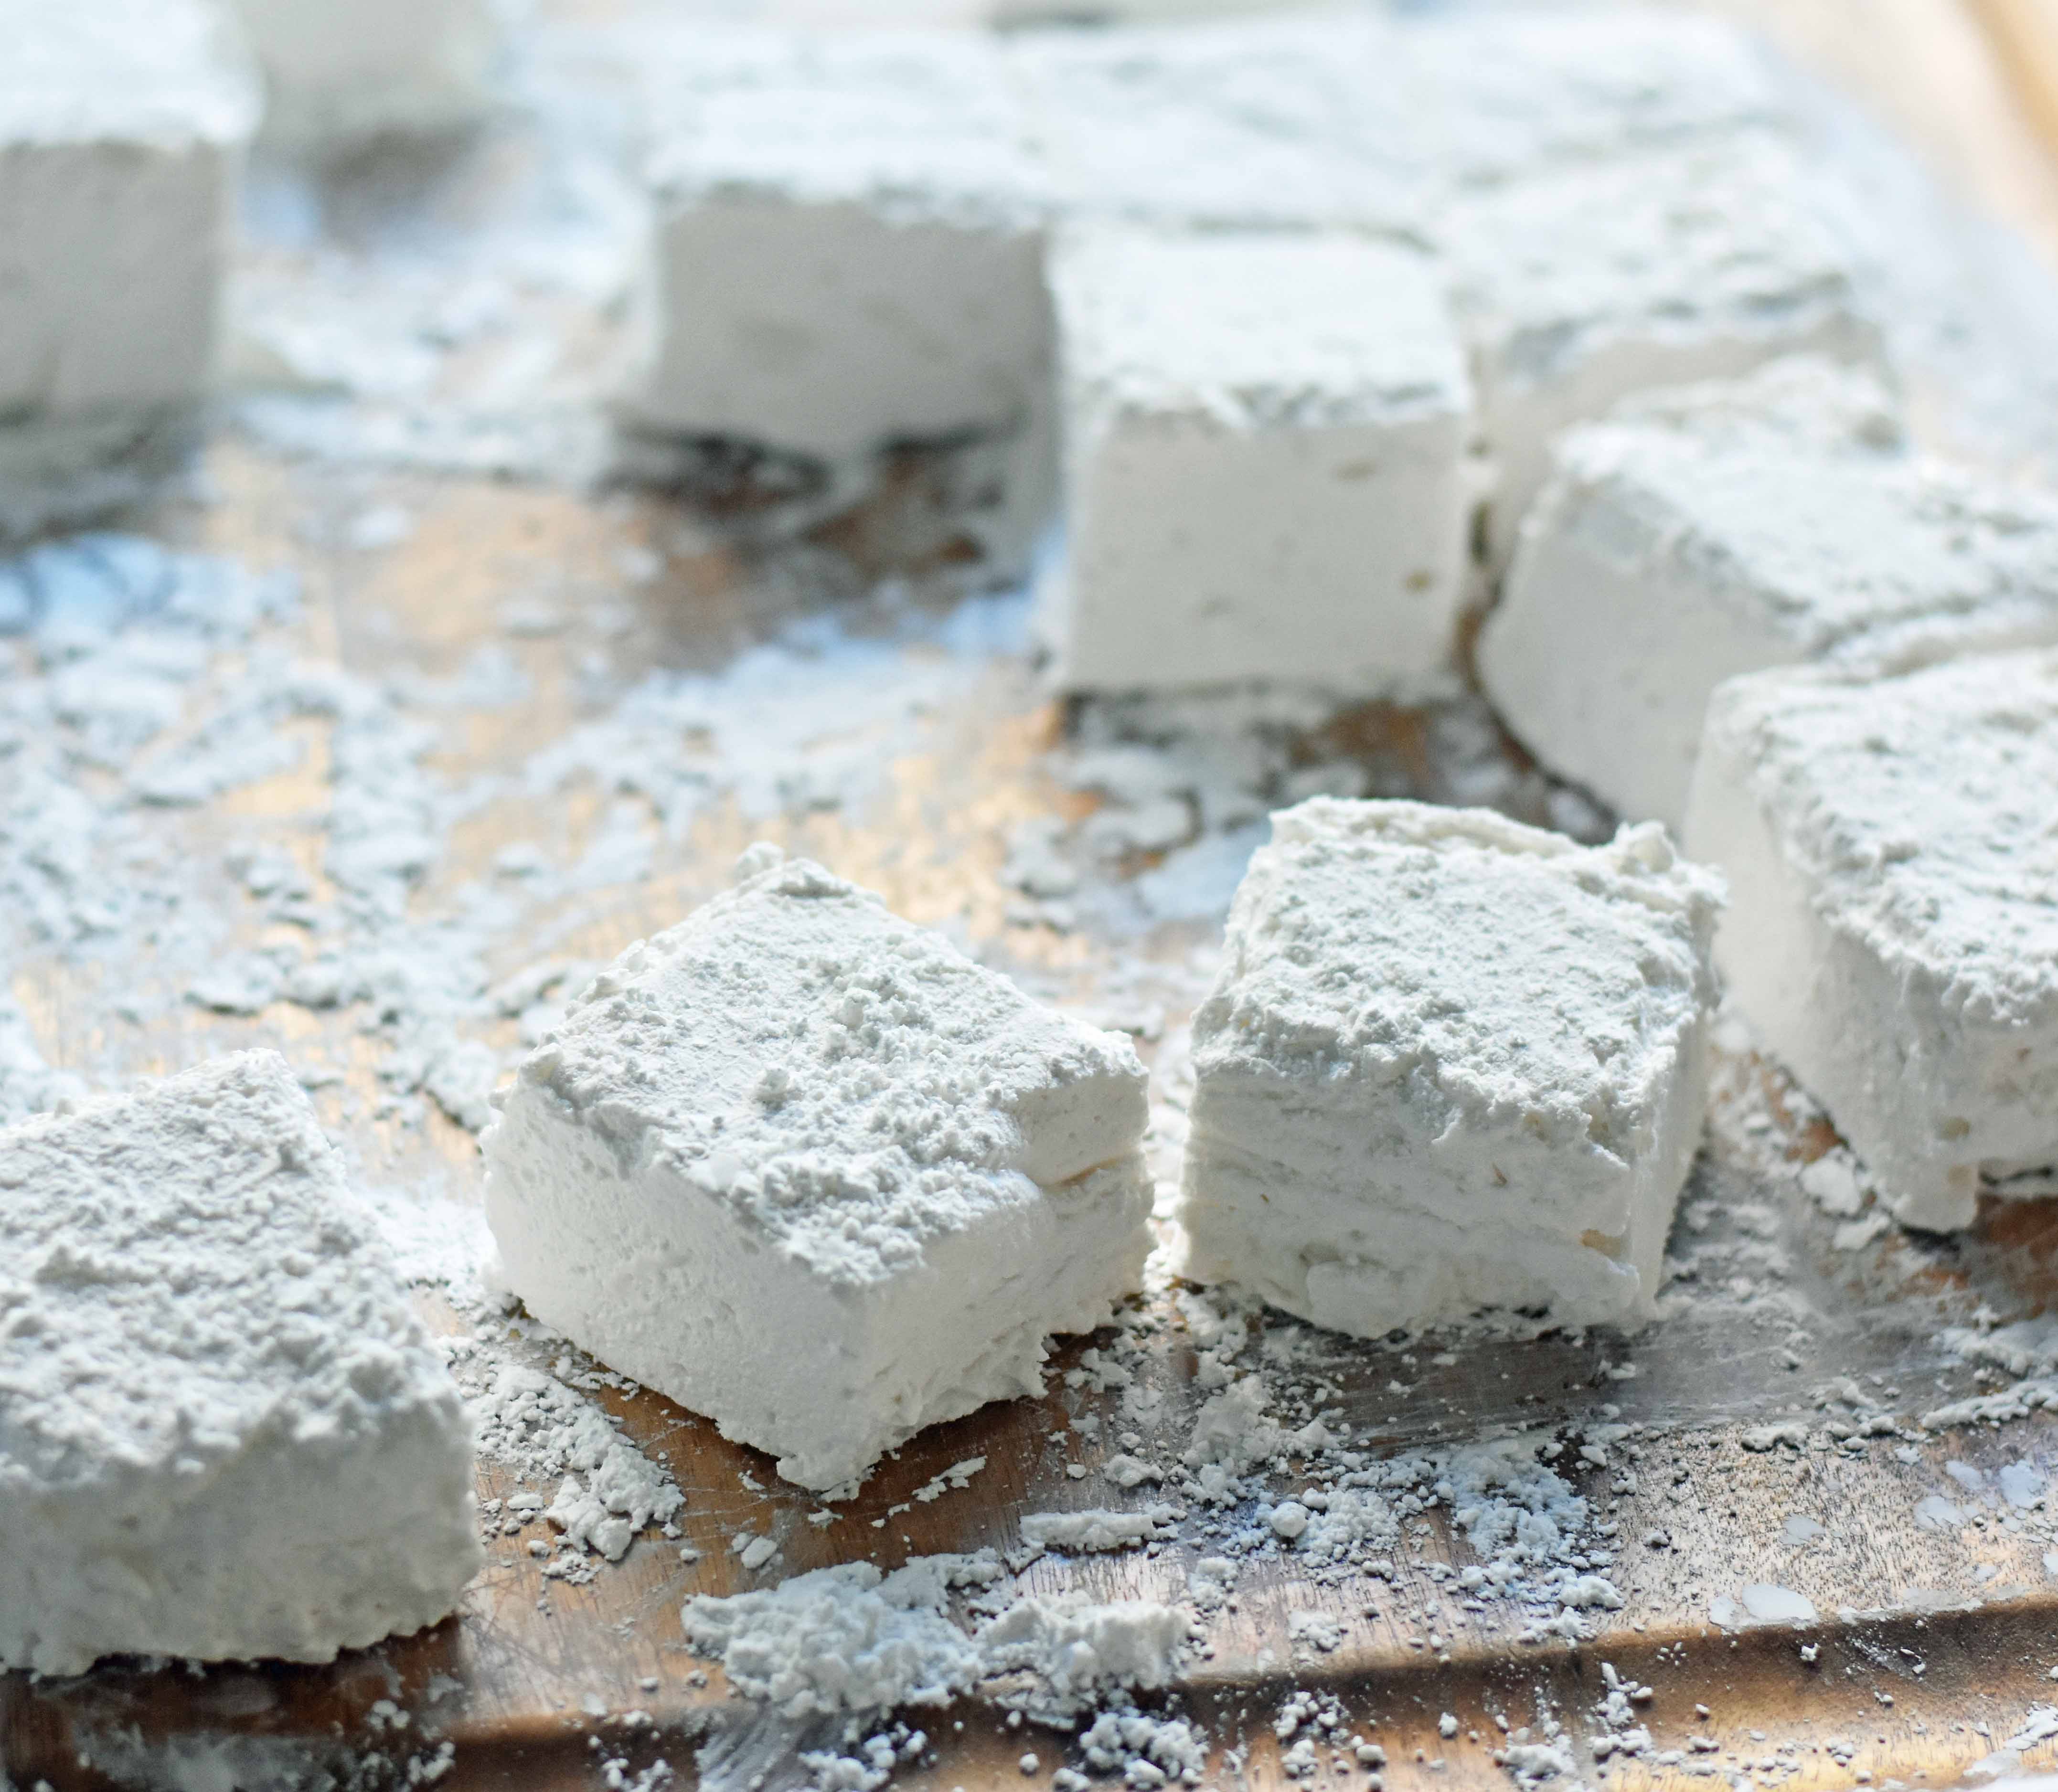 How to make soft and homemade marshmallows. Simple recipe to make perfect marshmallows at home. www.modernhoney.com